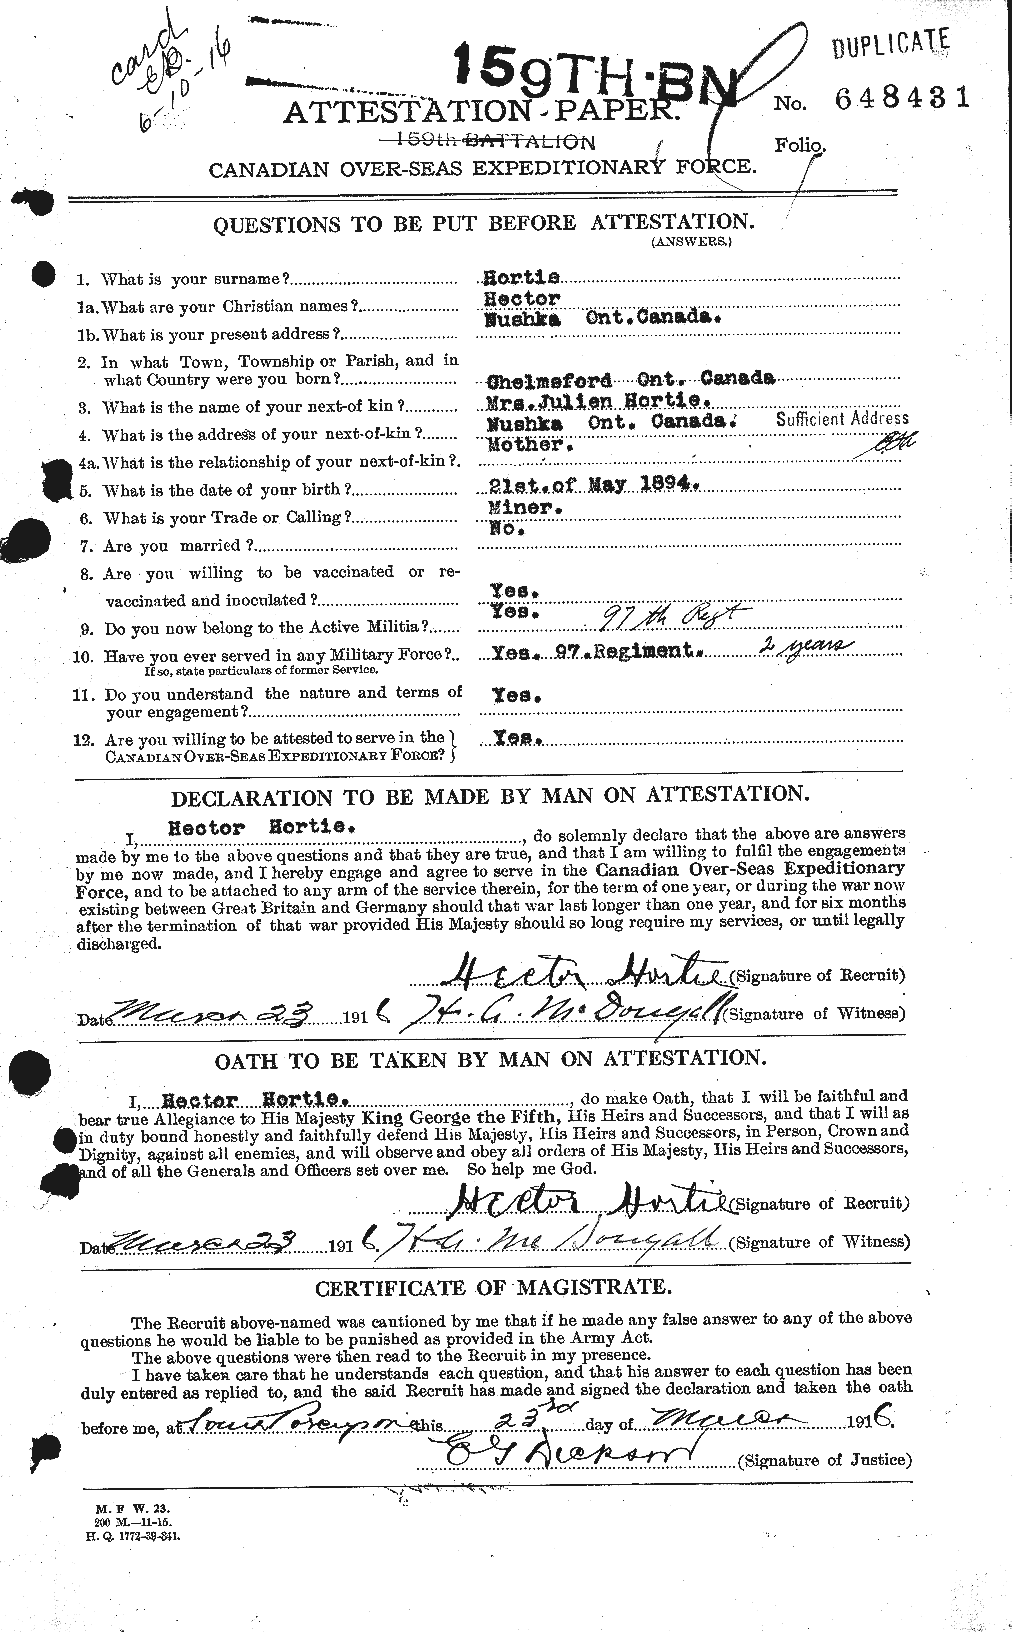 Personnel Records of the First World War - CEF 399804a